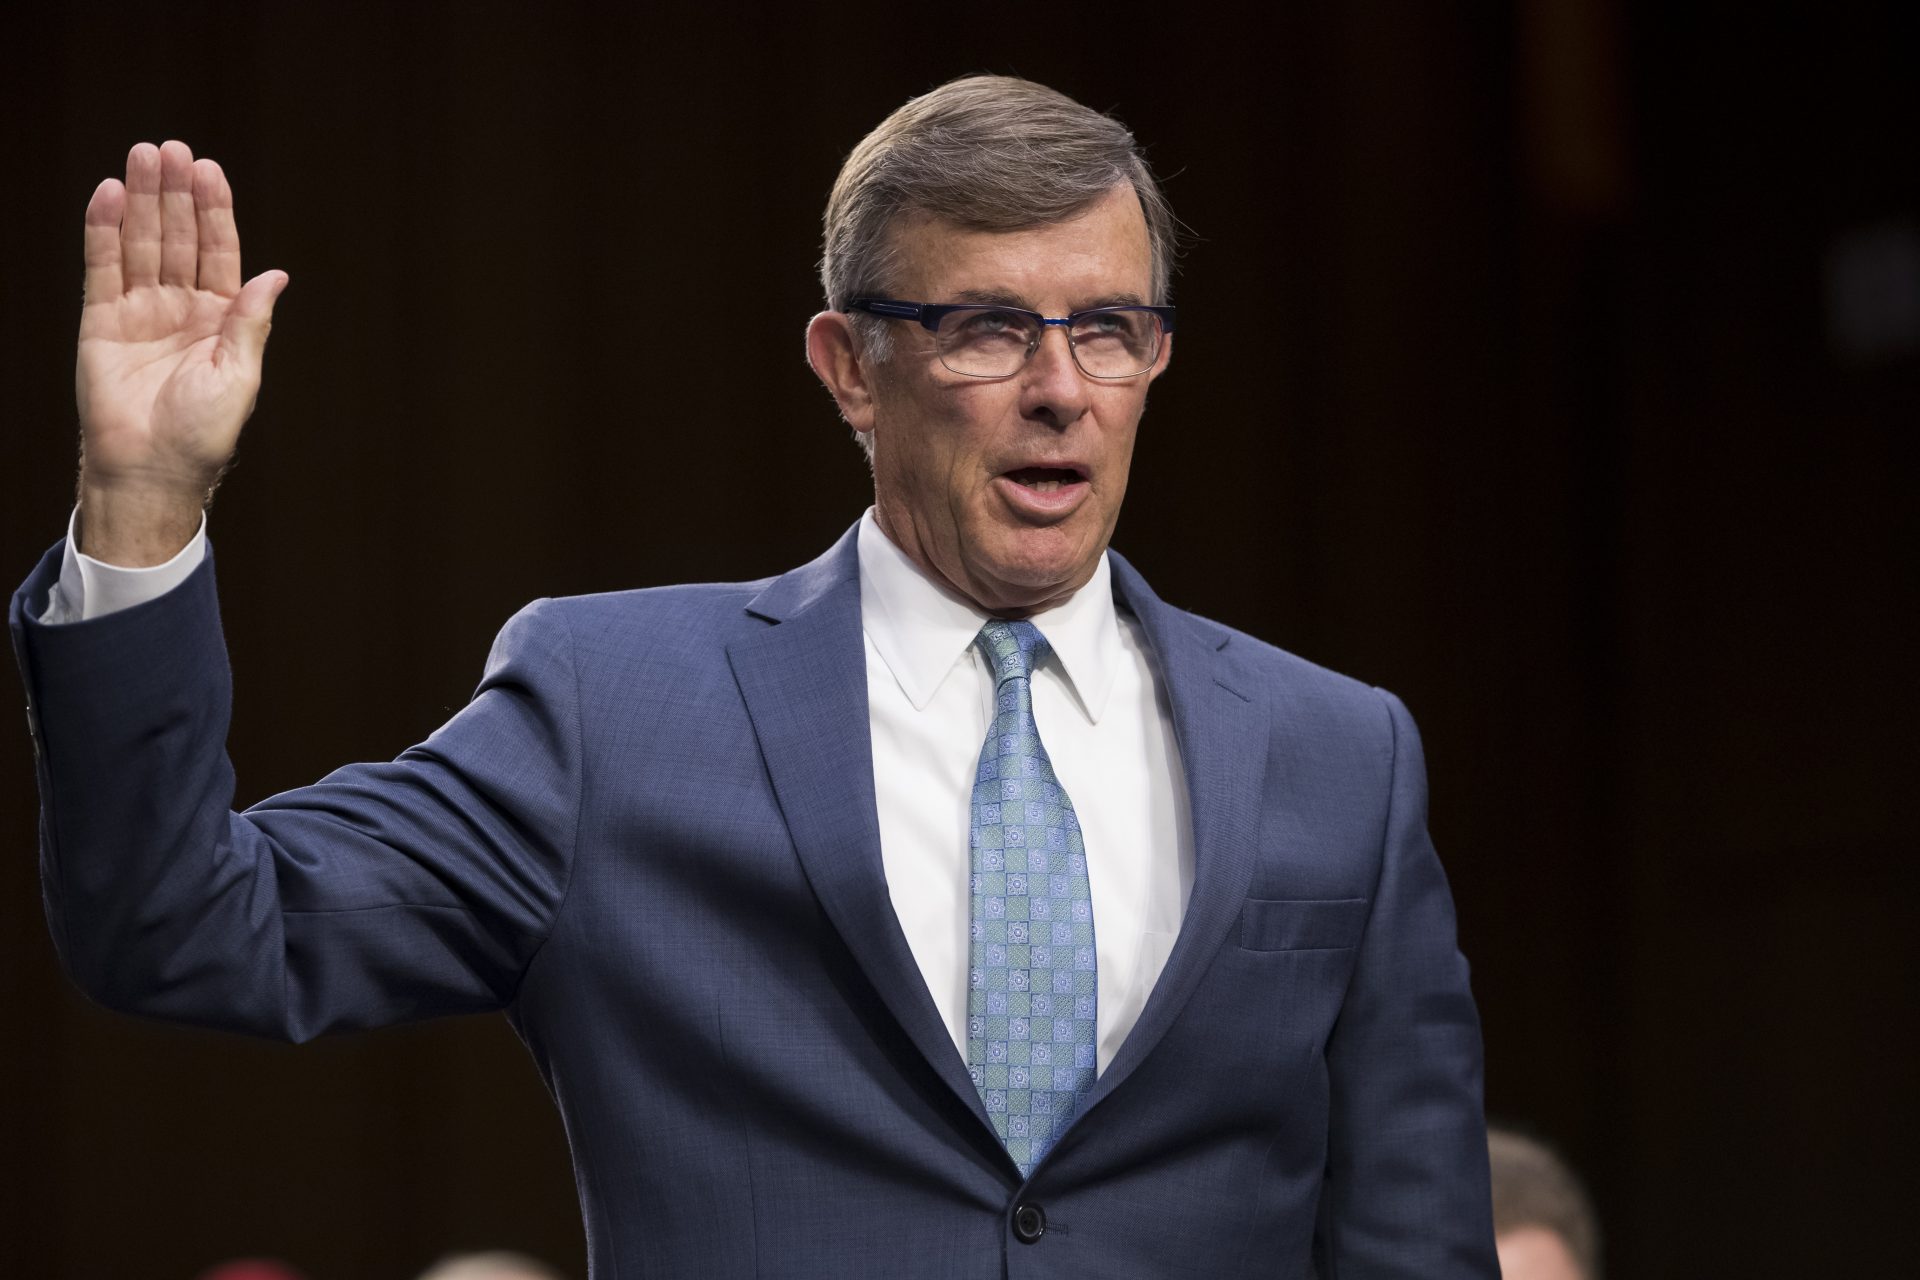 In this file photo from Wednesday, July 25, 2018, Joseph Maguire, now the acting director of National Intelligence, appears before the Senate Intelligence Committee to be confirmed to run the National Counterterrorism Center, on Capitol Hill in Washington. Lawmakers are demanding details of a whistleblower complaint about President Donald Trump and Ukraine raised by the DNI inspector general but the acting director of national intelligence, Maguire, has refused to share that information, citing presidential privilege. He is set to testify Thursday before the House.